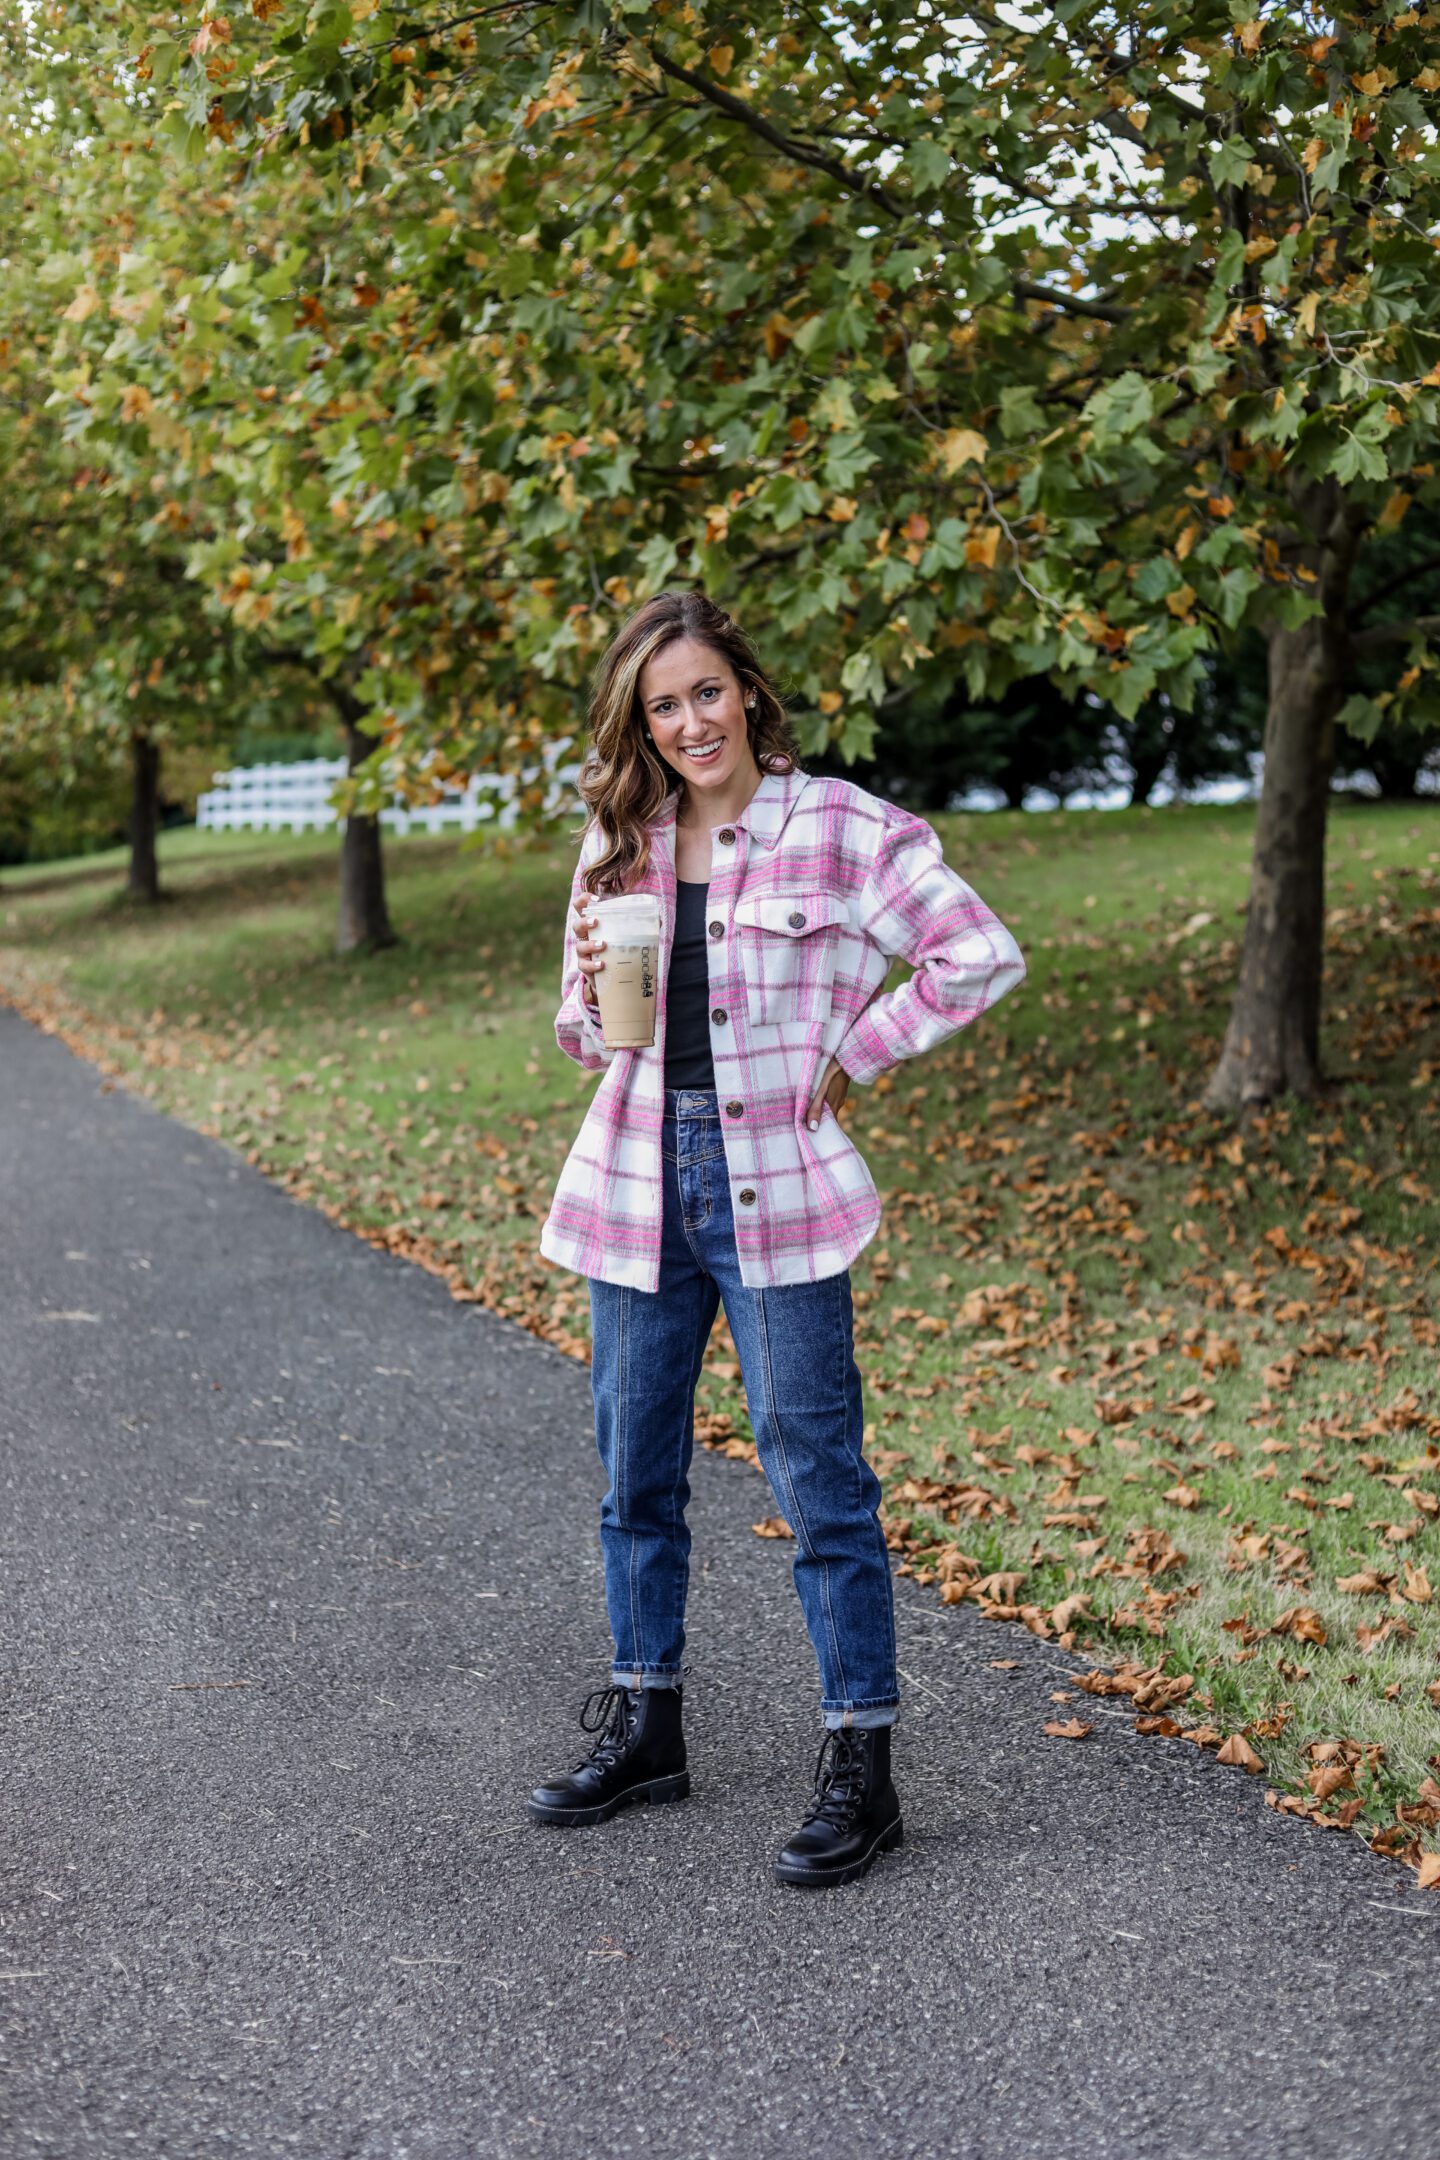 FALL TRENDS TO TRY - pink shacket and punky prep combat boots!